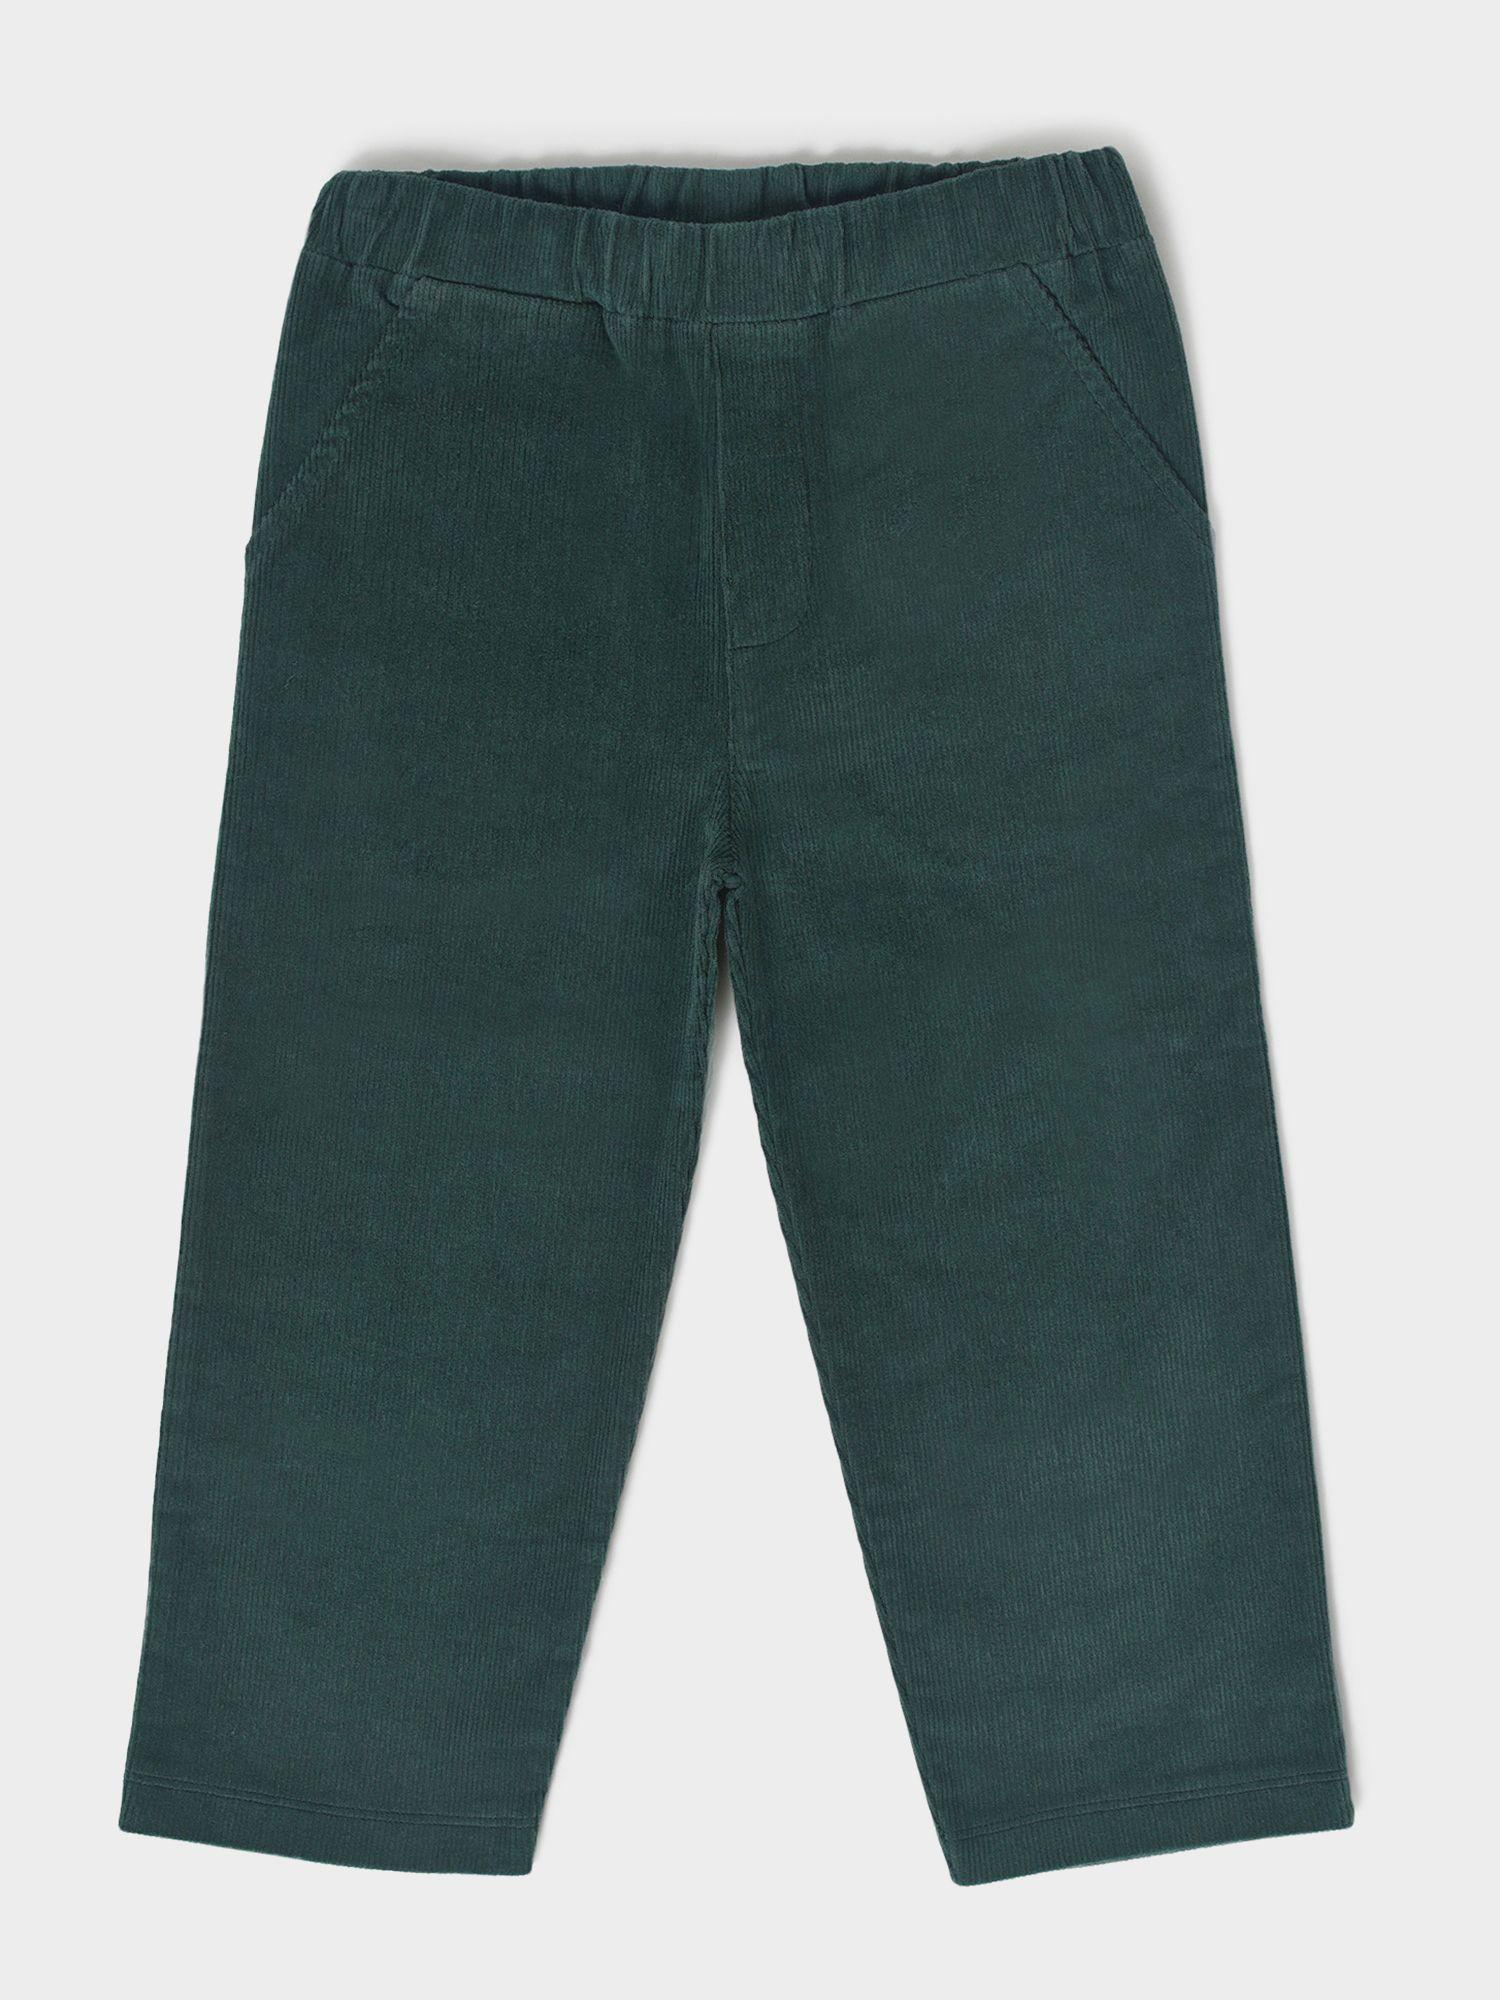 green solid corduroy trouser for boys